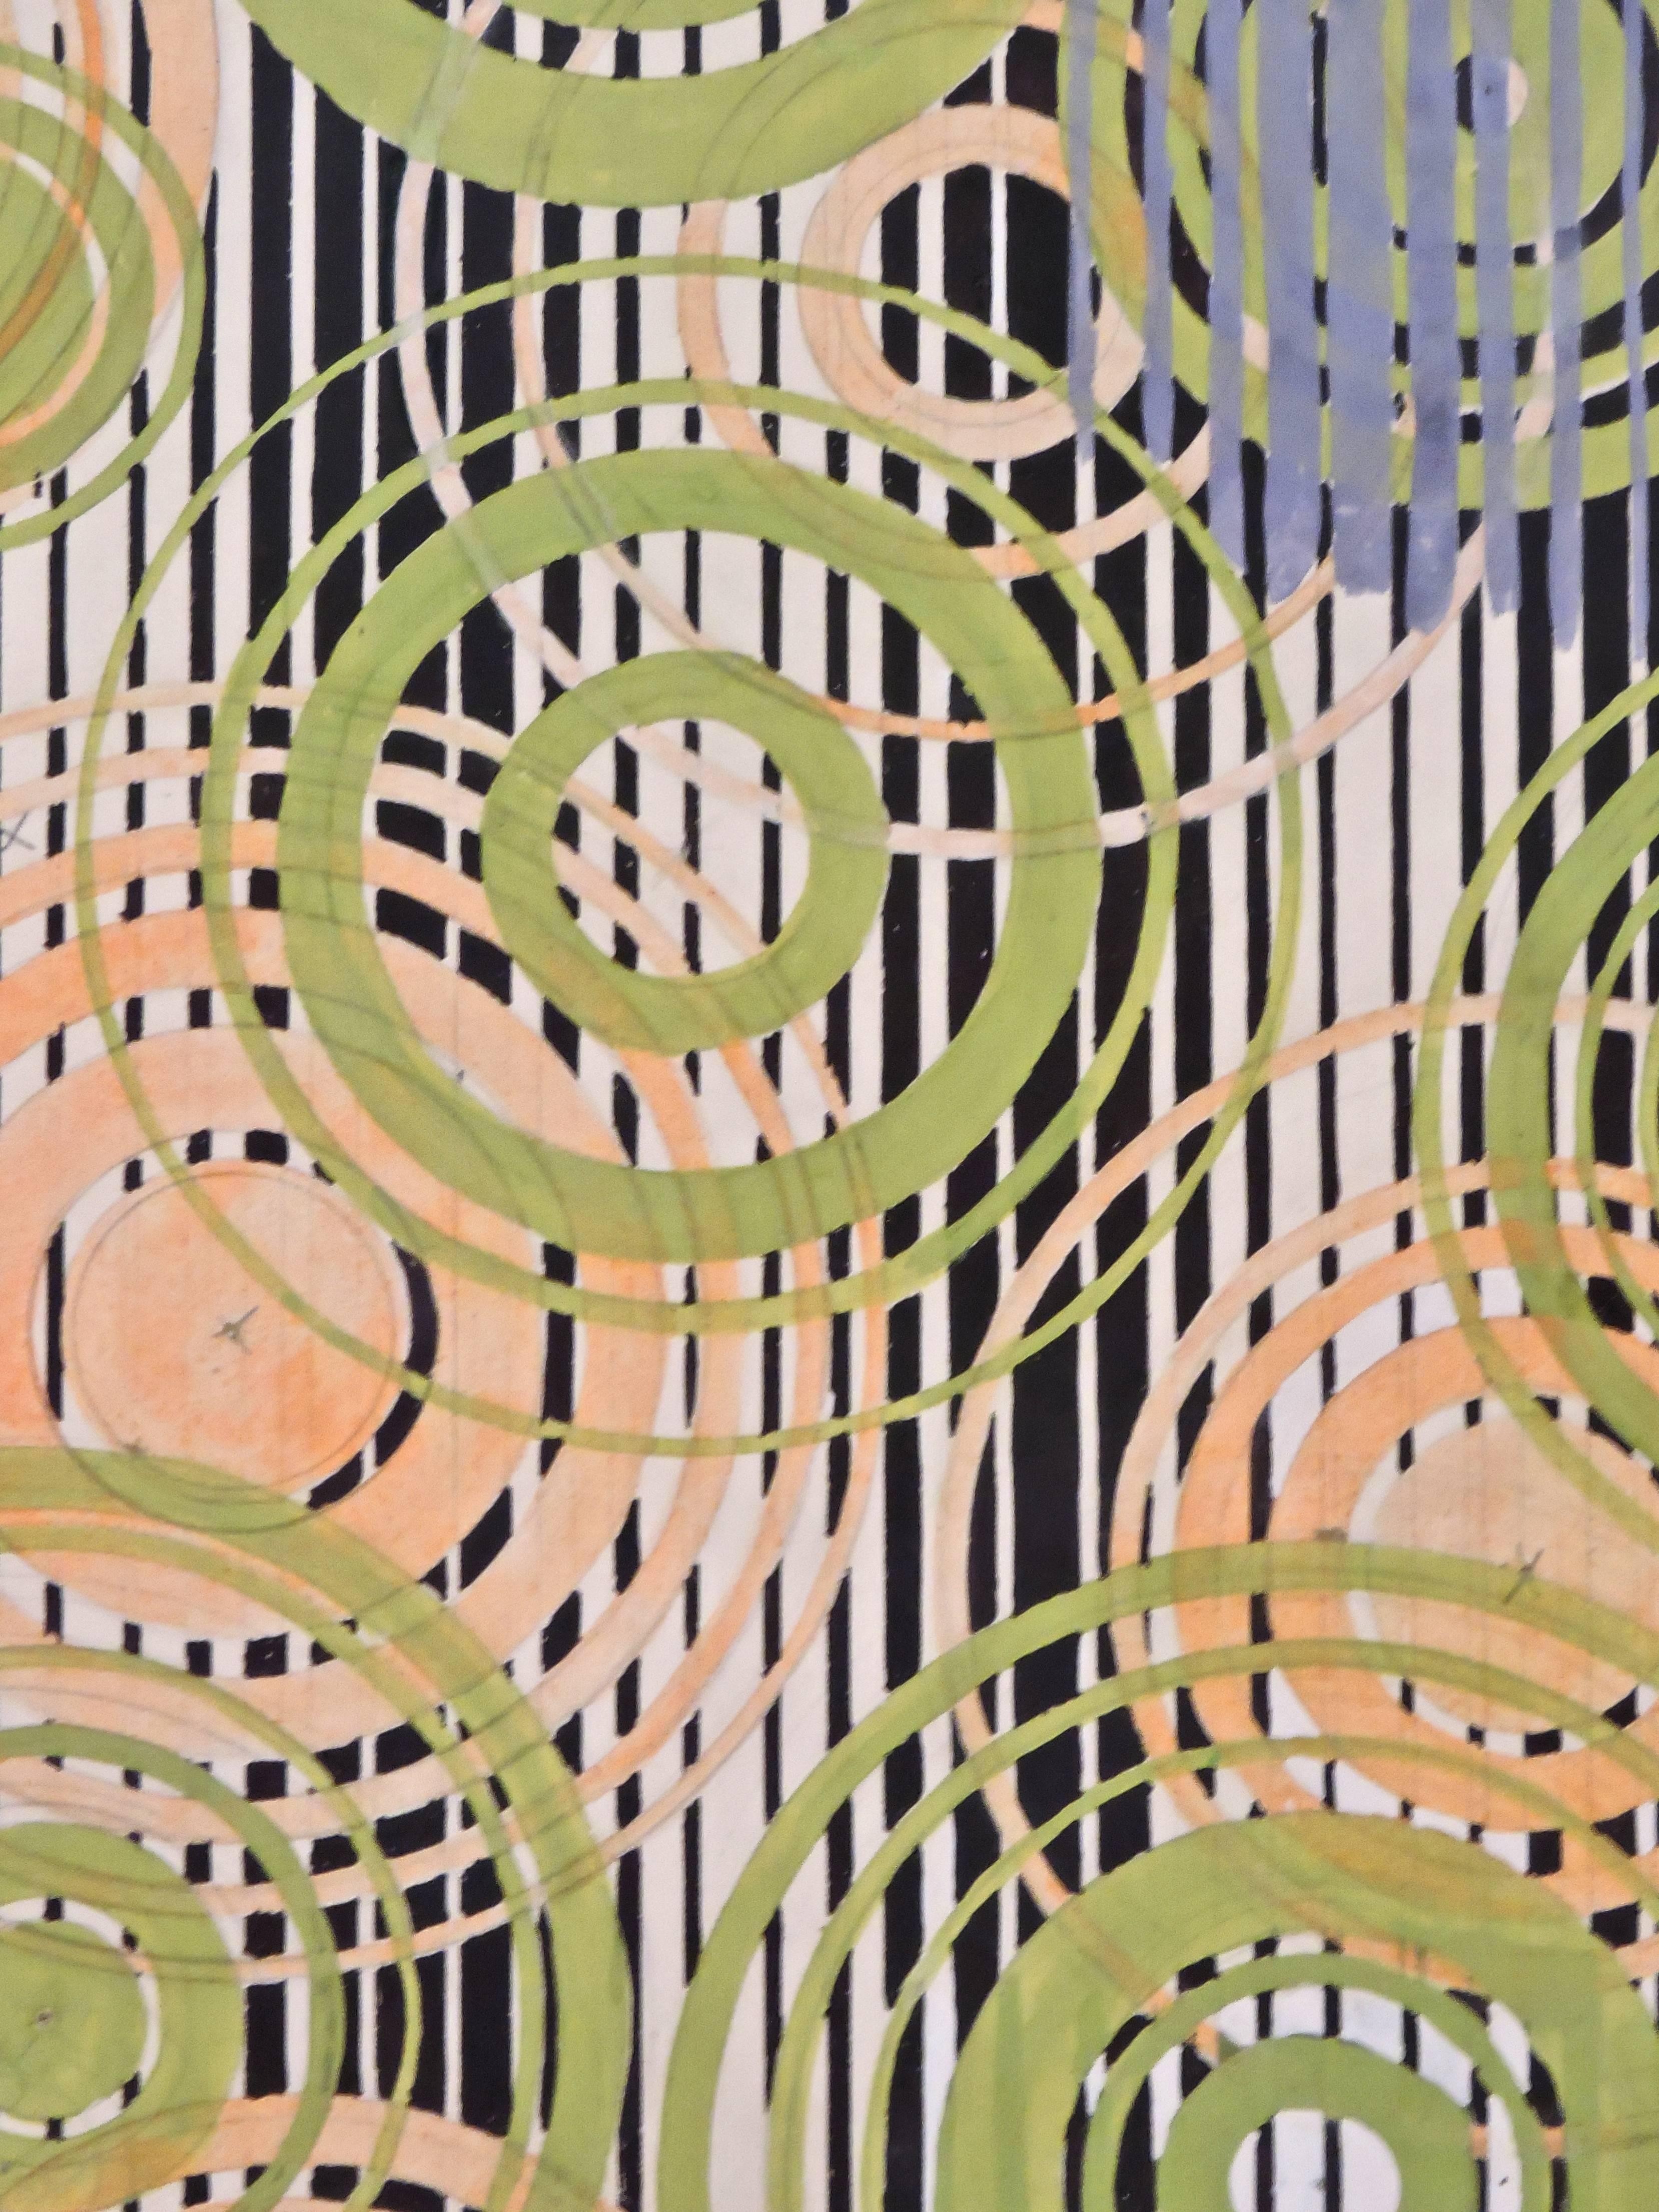 Concentric orange and green circles on black striped background

Gouache on paper, 
Signature stamped lower right "Raoul Dufy" 

Certificat de Fanny Guillon-Laffaille, N° TO7-3103, Paris, December 2007. 
This work will be included in